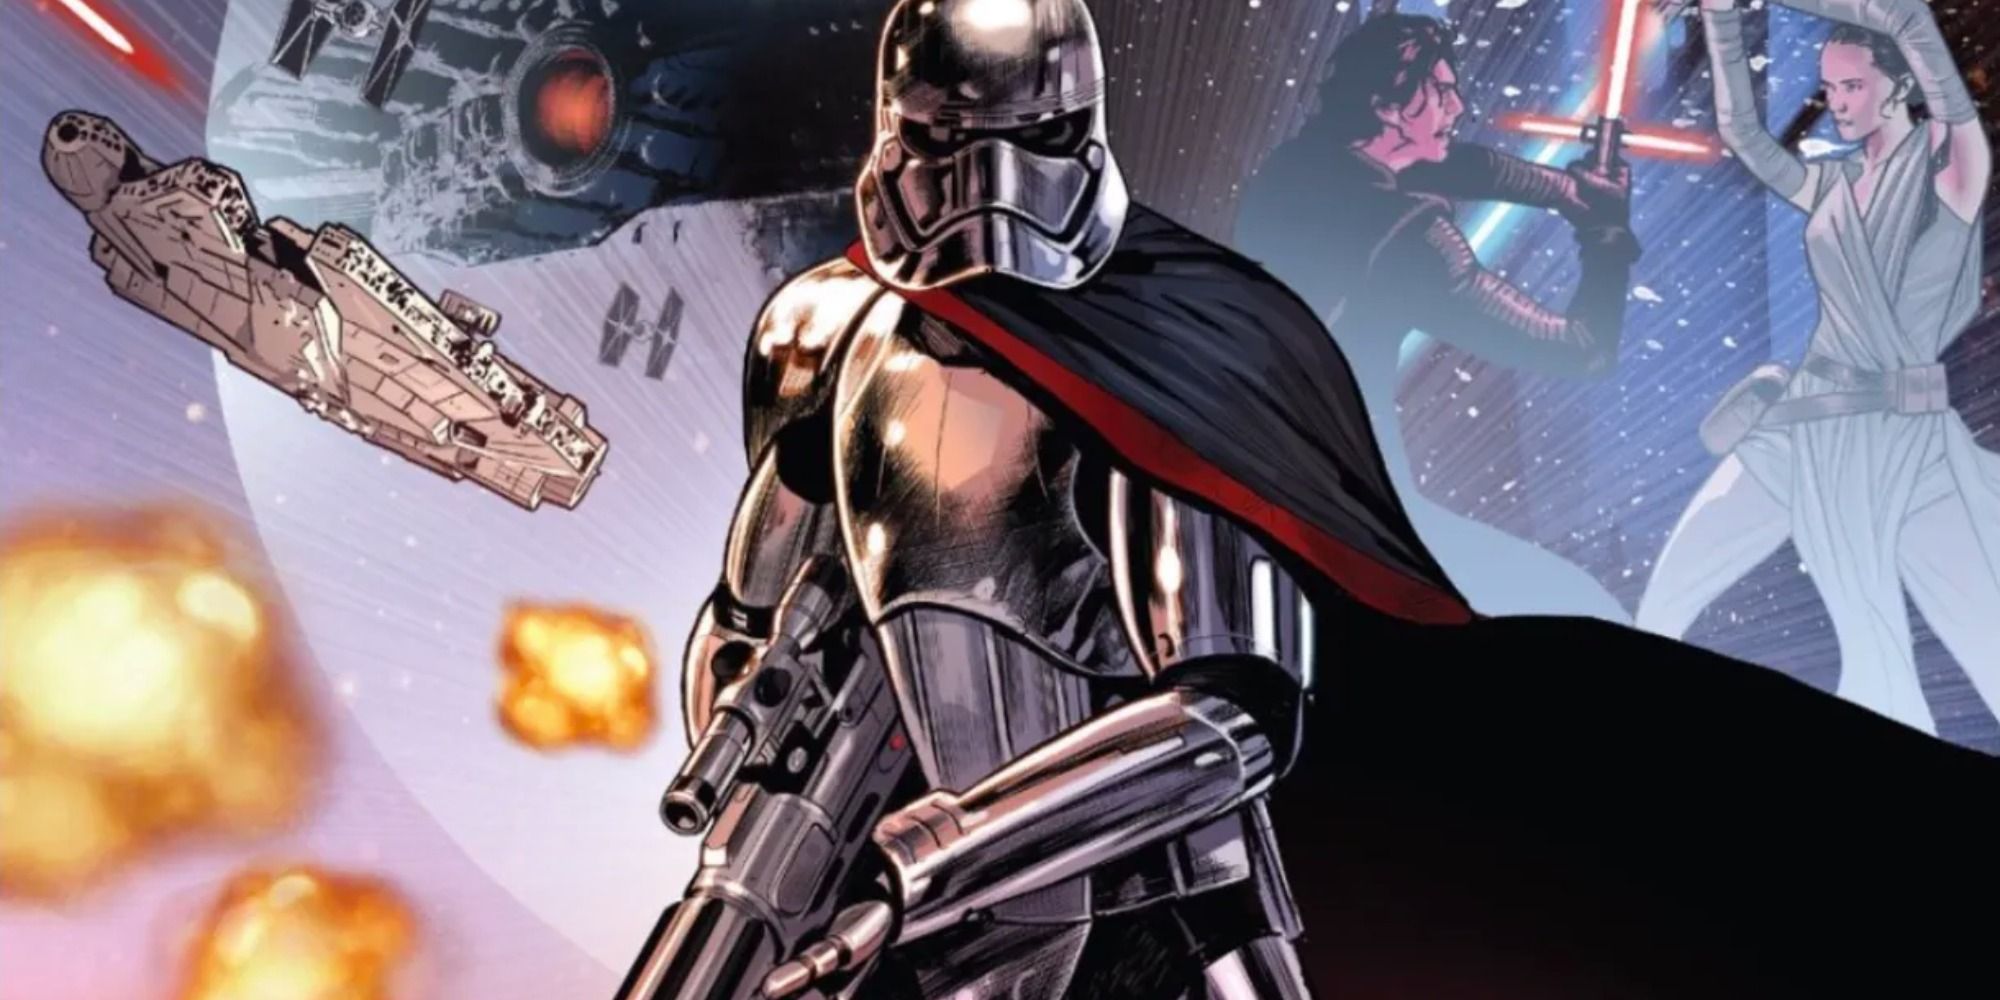 Journey to Star Wars: The Last Jedi - Captain Phasma #1, cover art by Paul Renaud